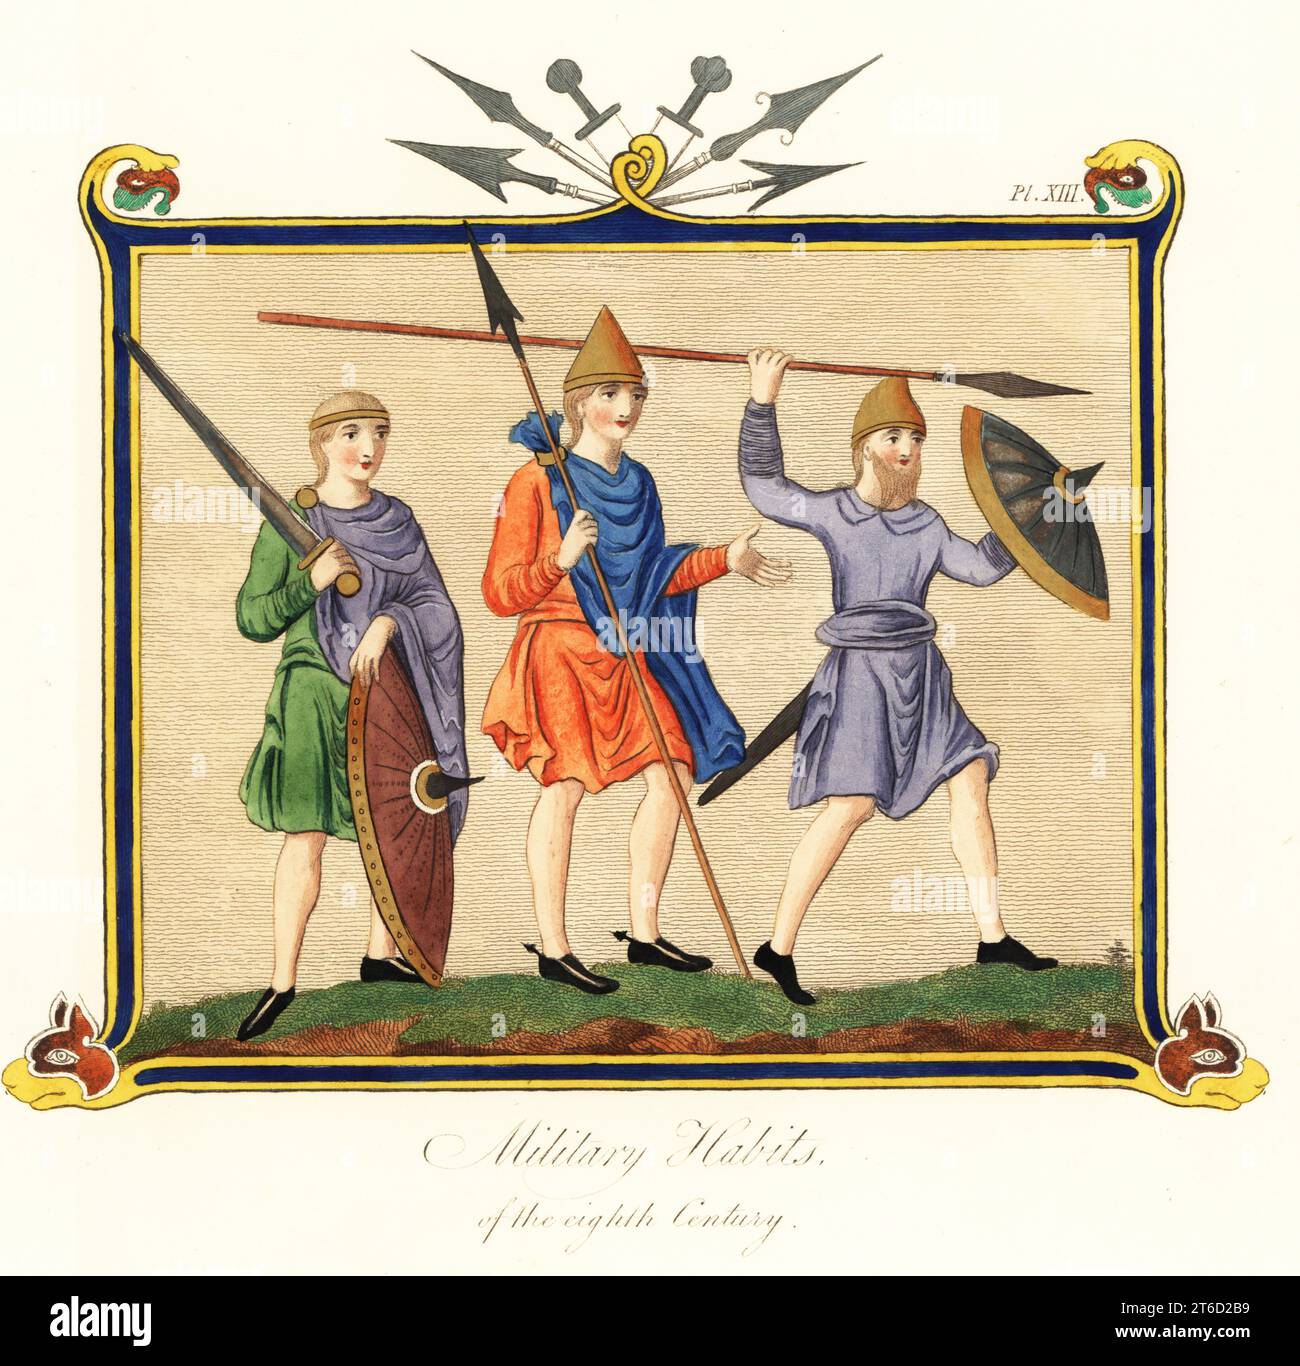 Anglo Saxon officer, cavalier and foot soldier. First officer in the royal guard, mounted soldier with lance and an infantry man with lance and shield. From Old English Hexateuch, Cotton MS Claudius B iv. Handcoloured engraving by Joseph Strutt from his Complete View of the Dress and Habits of the People of England, Henry Bohn, London, 1842. Stock Photo